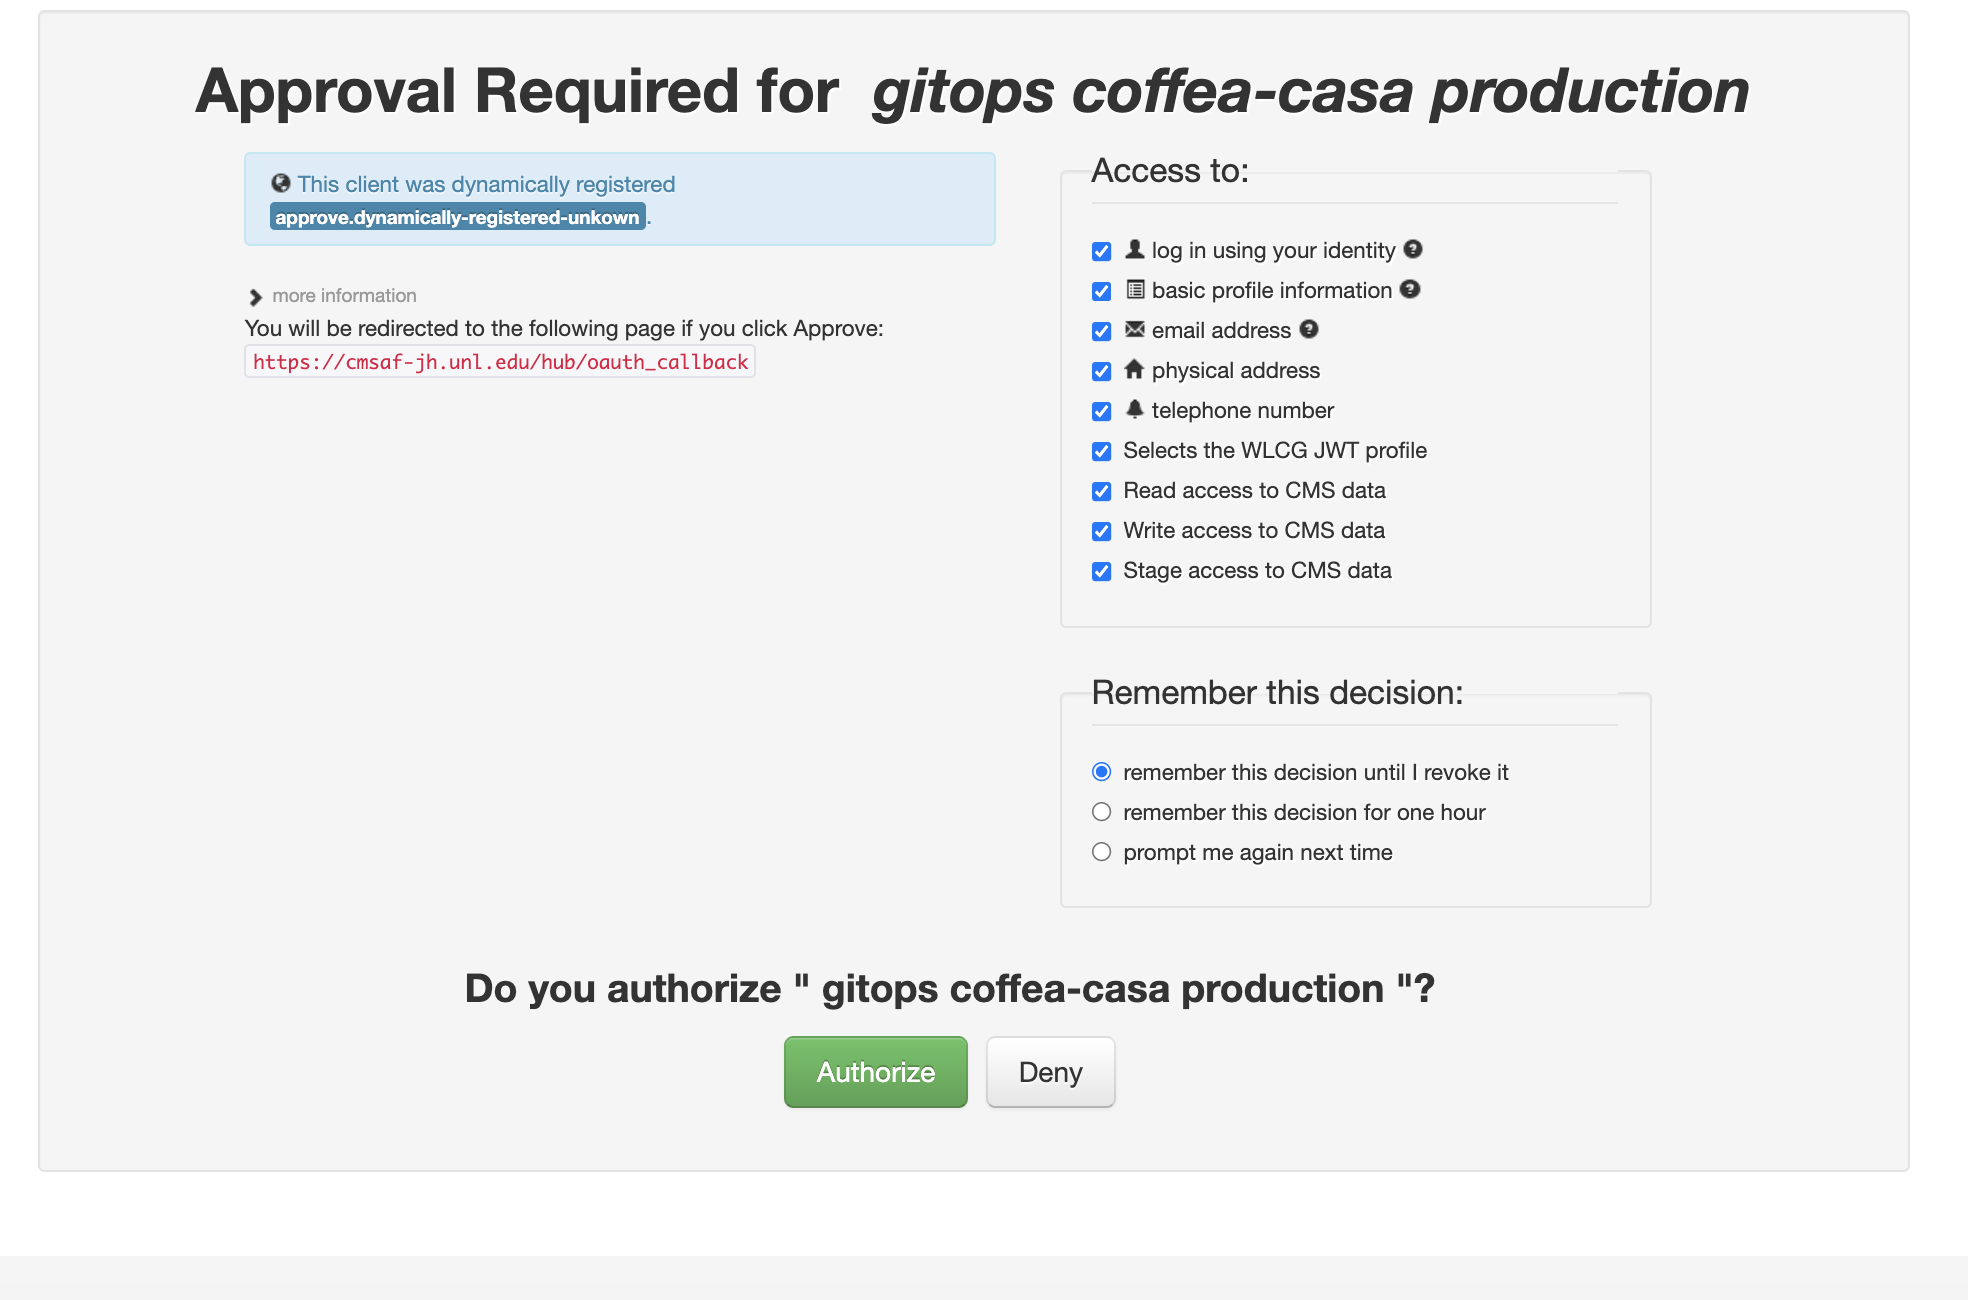 Approval required for CMS Authz authentification to Coffea-casa Analysis Facility @ UChicago